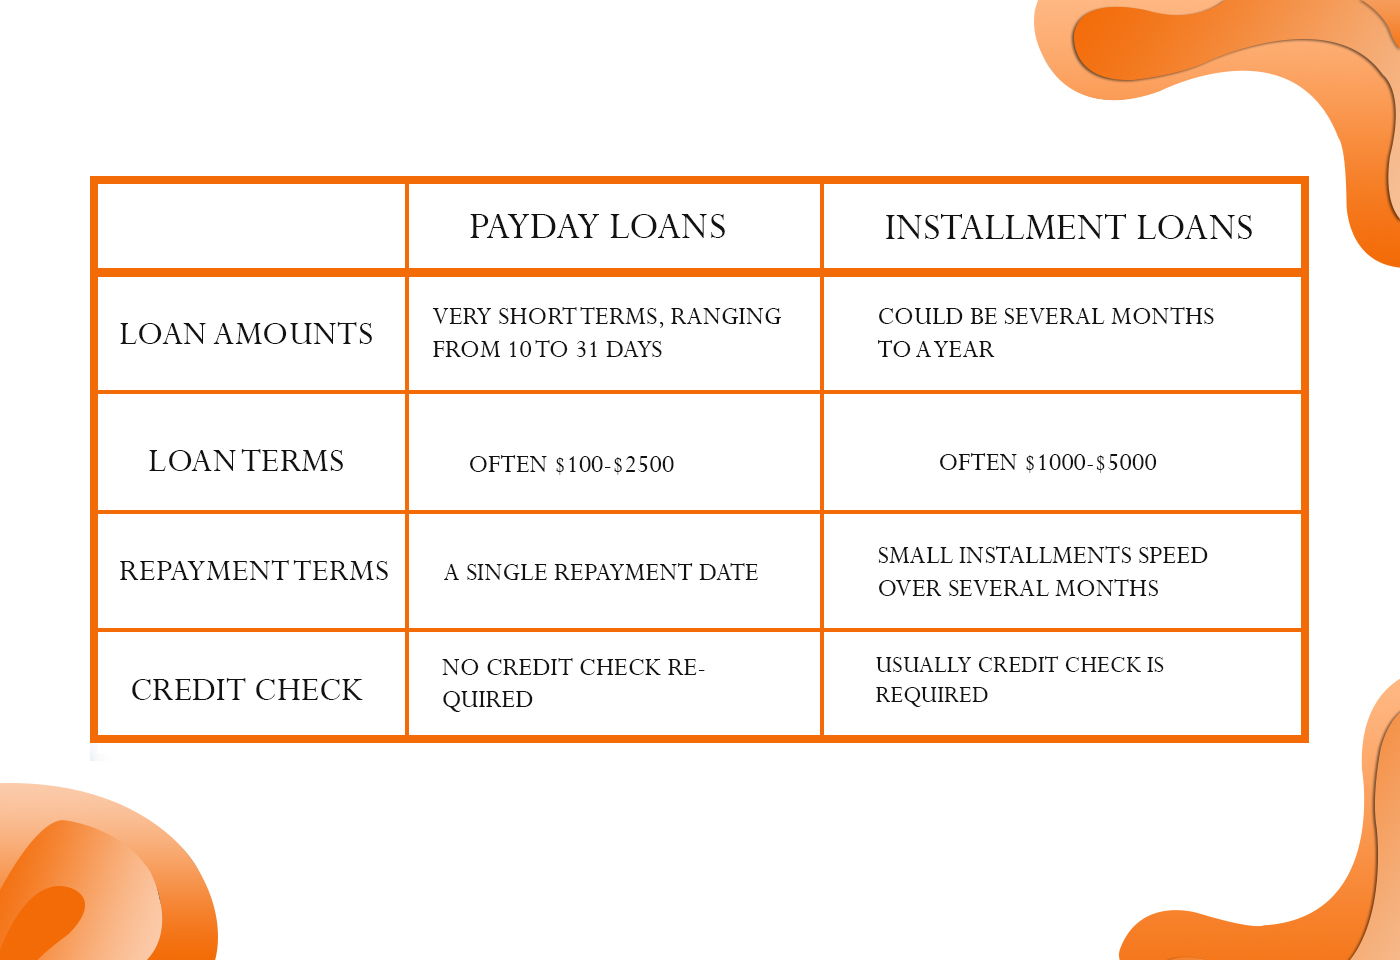 Payday Loans or Installment Loans